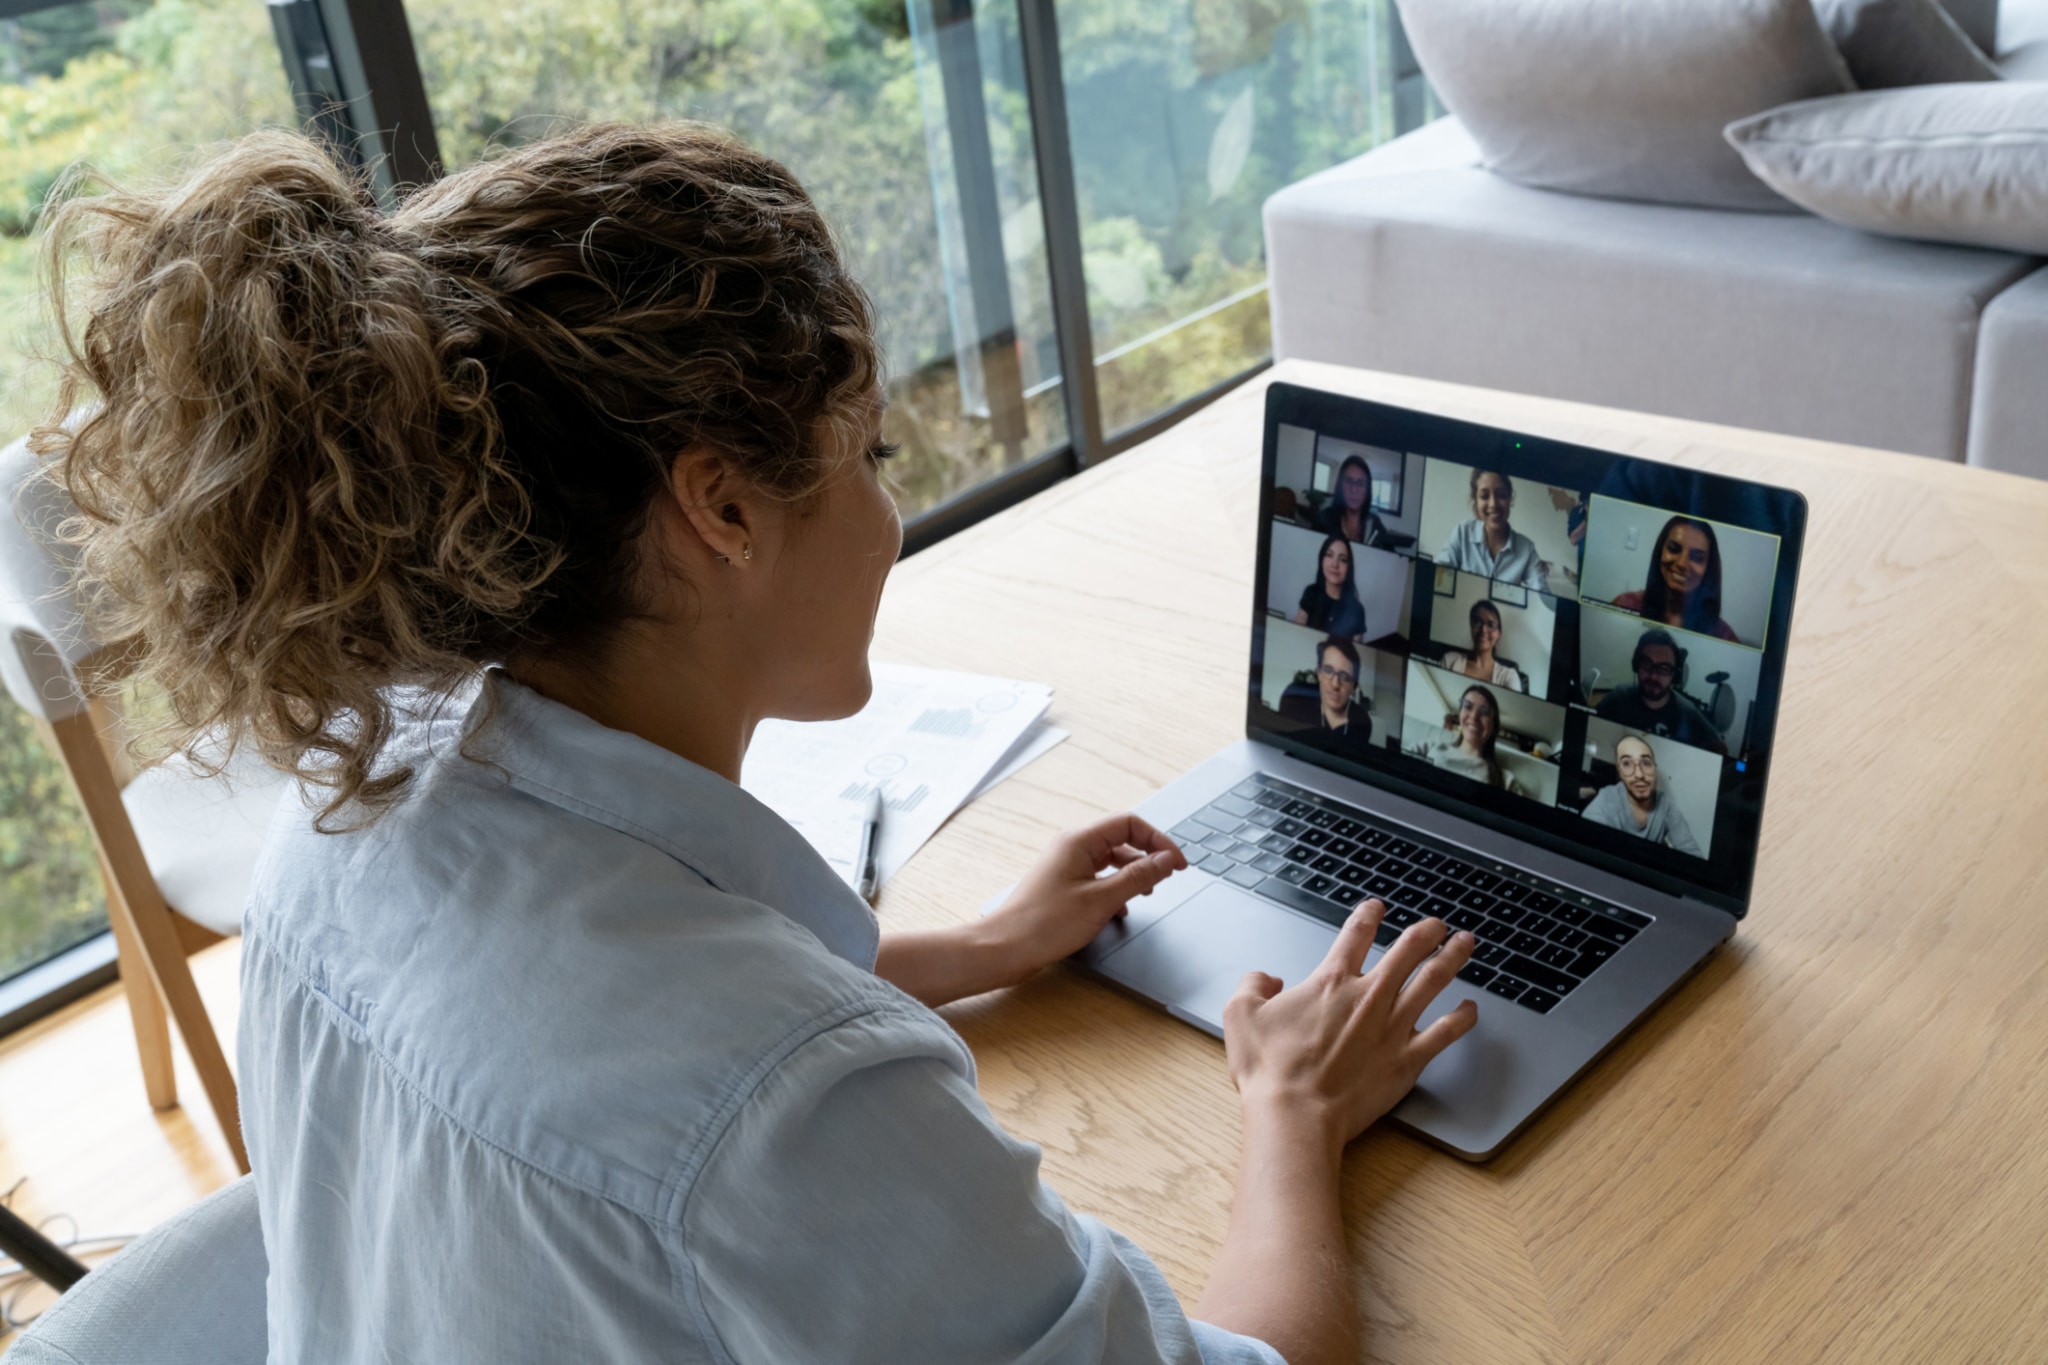 video conference with her coworkers while working from home